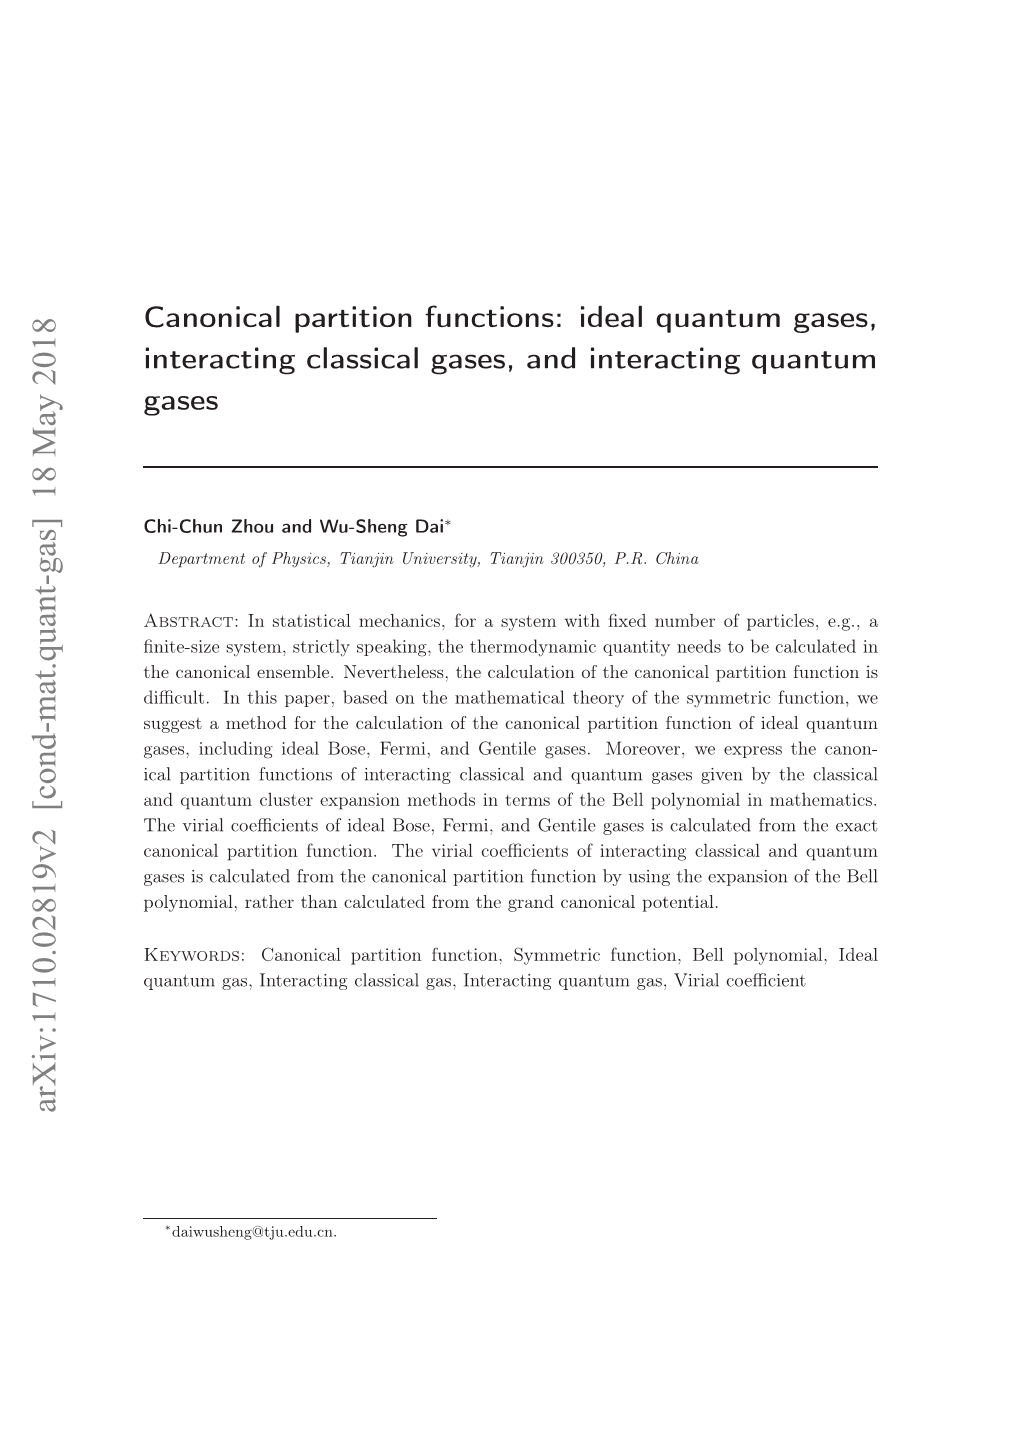 Canonical Partition Functions: Ideal Quantum Gases, Interacting